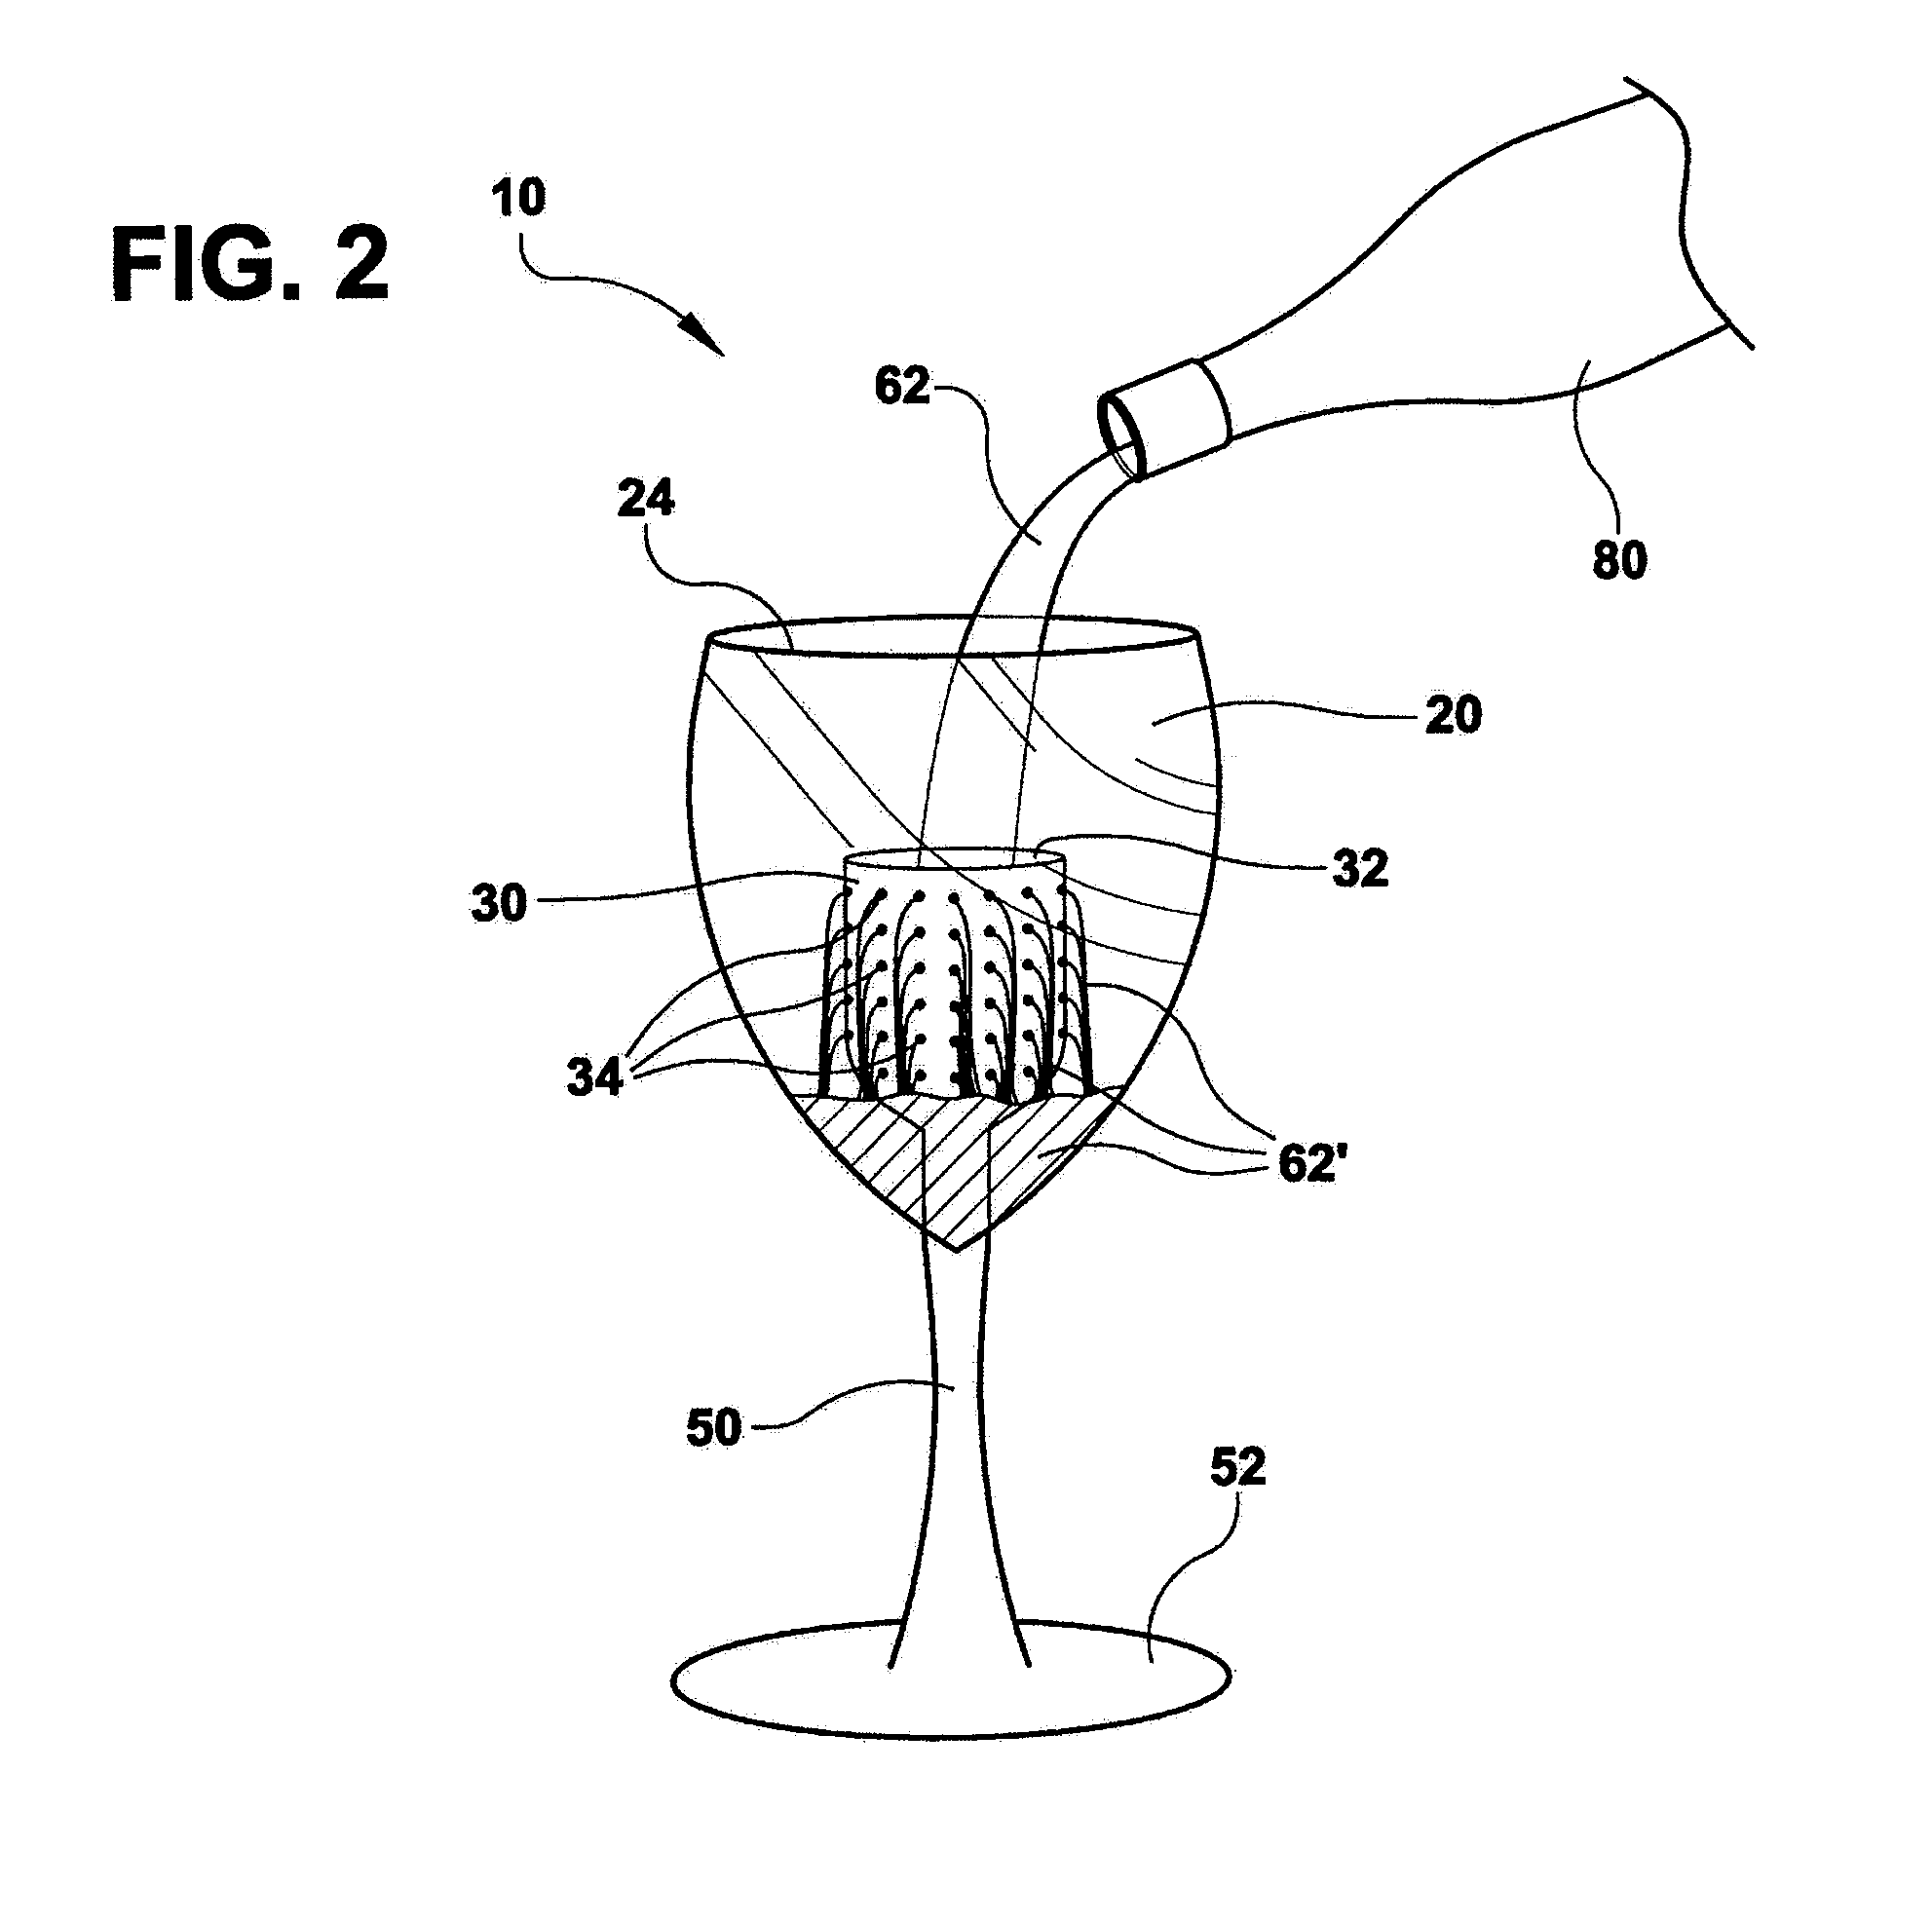 Beverage glass with internal decanting, filtering, mixing and aerating cell